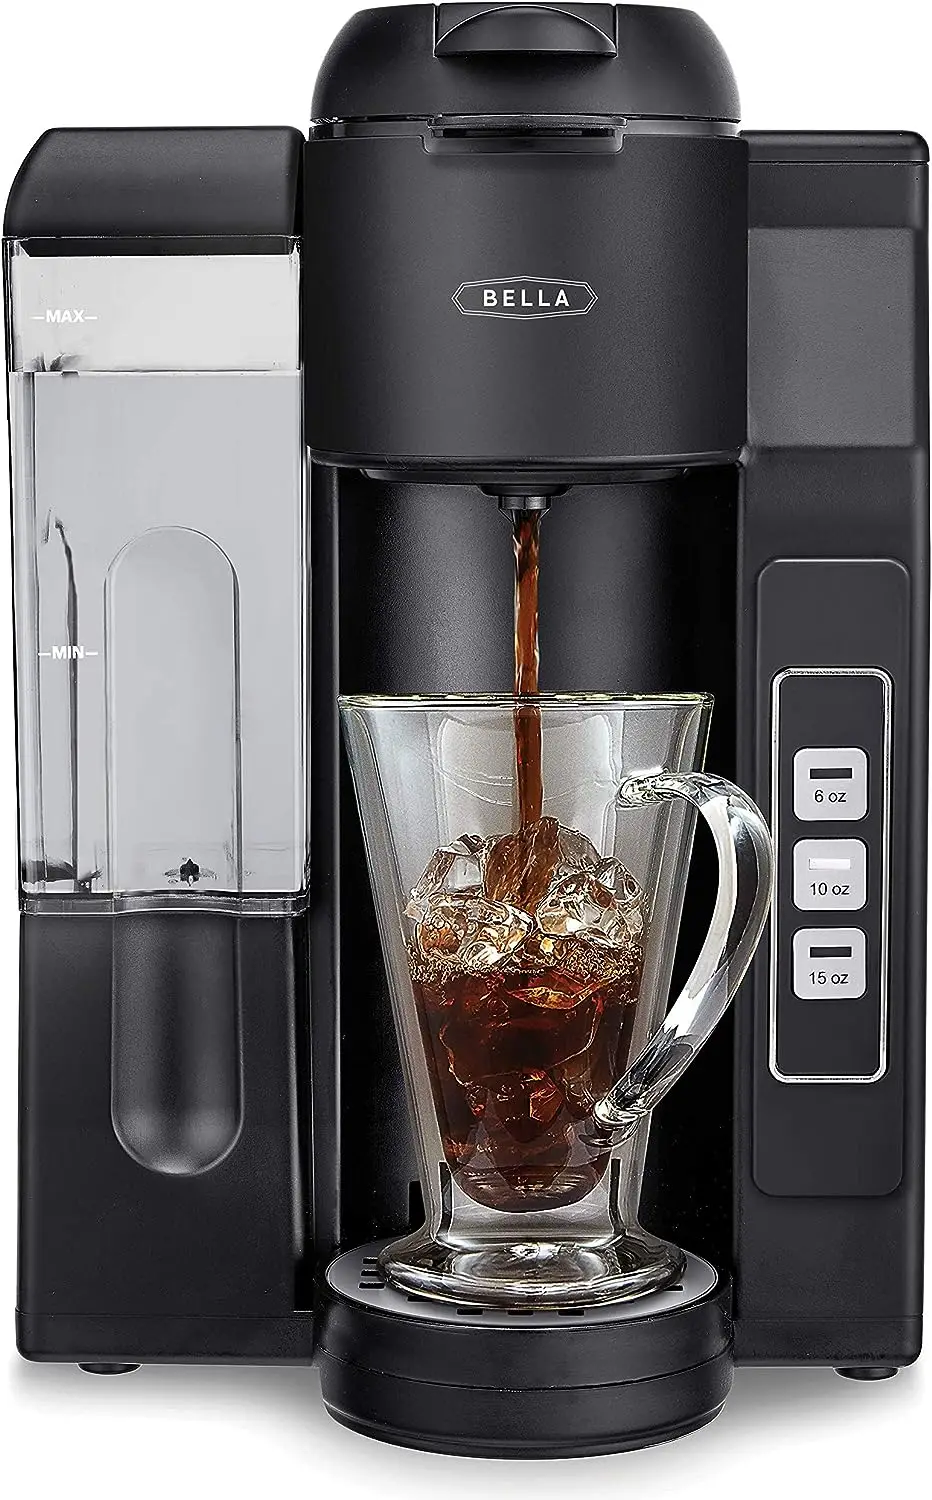 

Single Serve Coffee Maker, Dual Brew, K-cup Compatible - Ground Coffee Brewer with Removable Water Tank & Adjustable Drip Tr